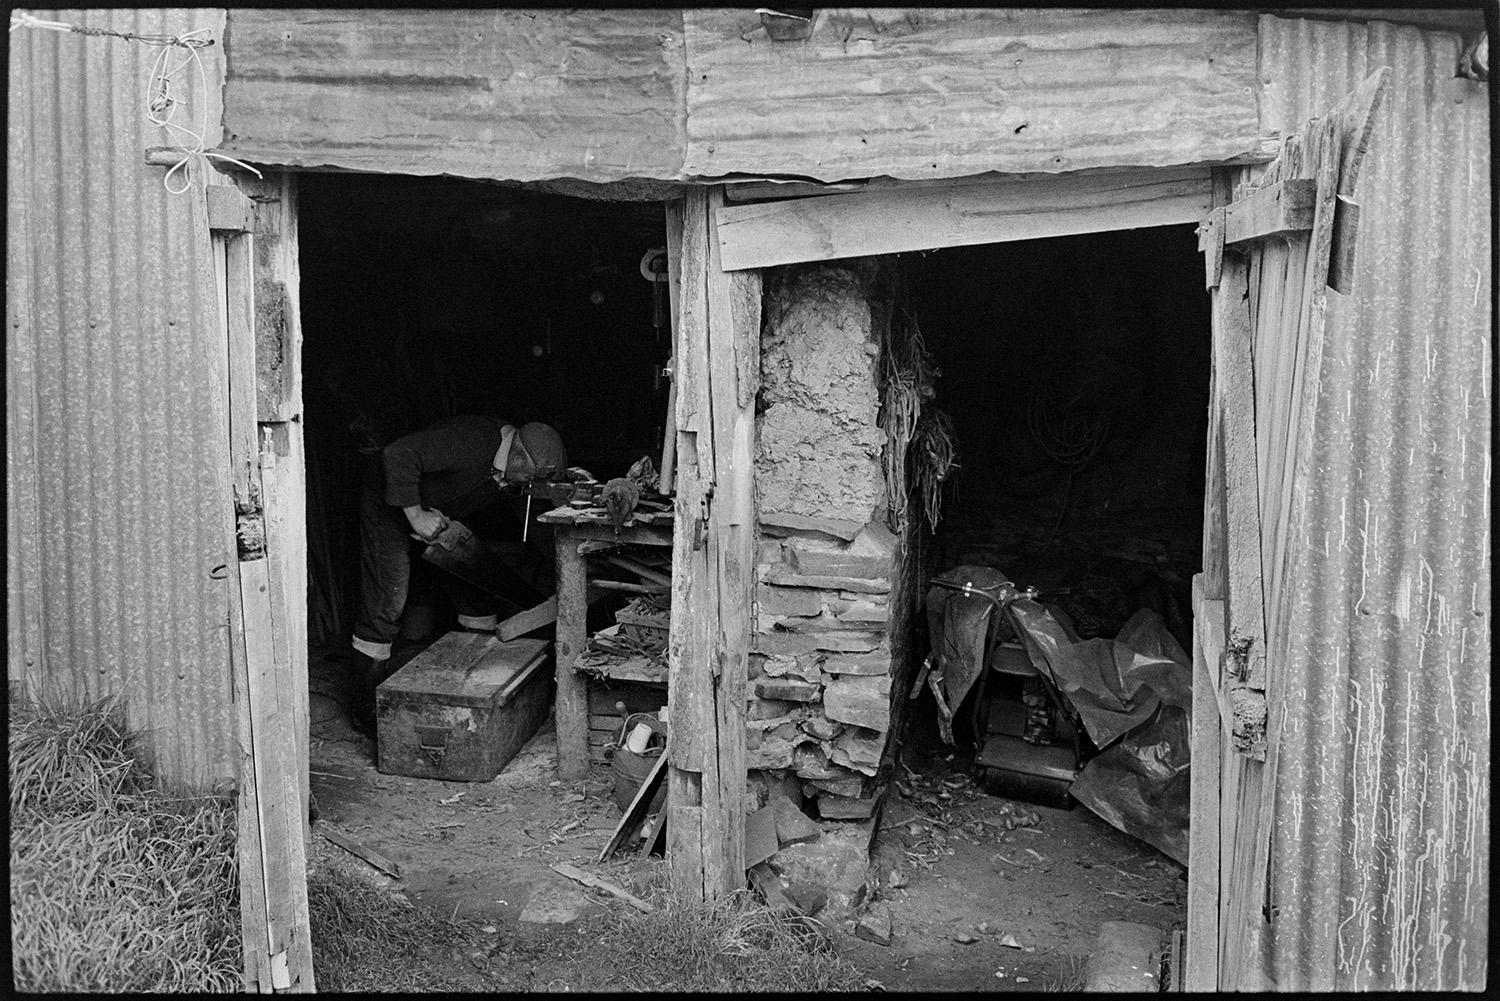 Shed door.
[A corrugated iron shed with two wooden door entrances, possibly at Dolton. Some of the stored items, including a roller or lawn mower, and a man using a saw at a work bench are visible. An interior cob wall can also be seen between the two entrances. ]